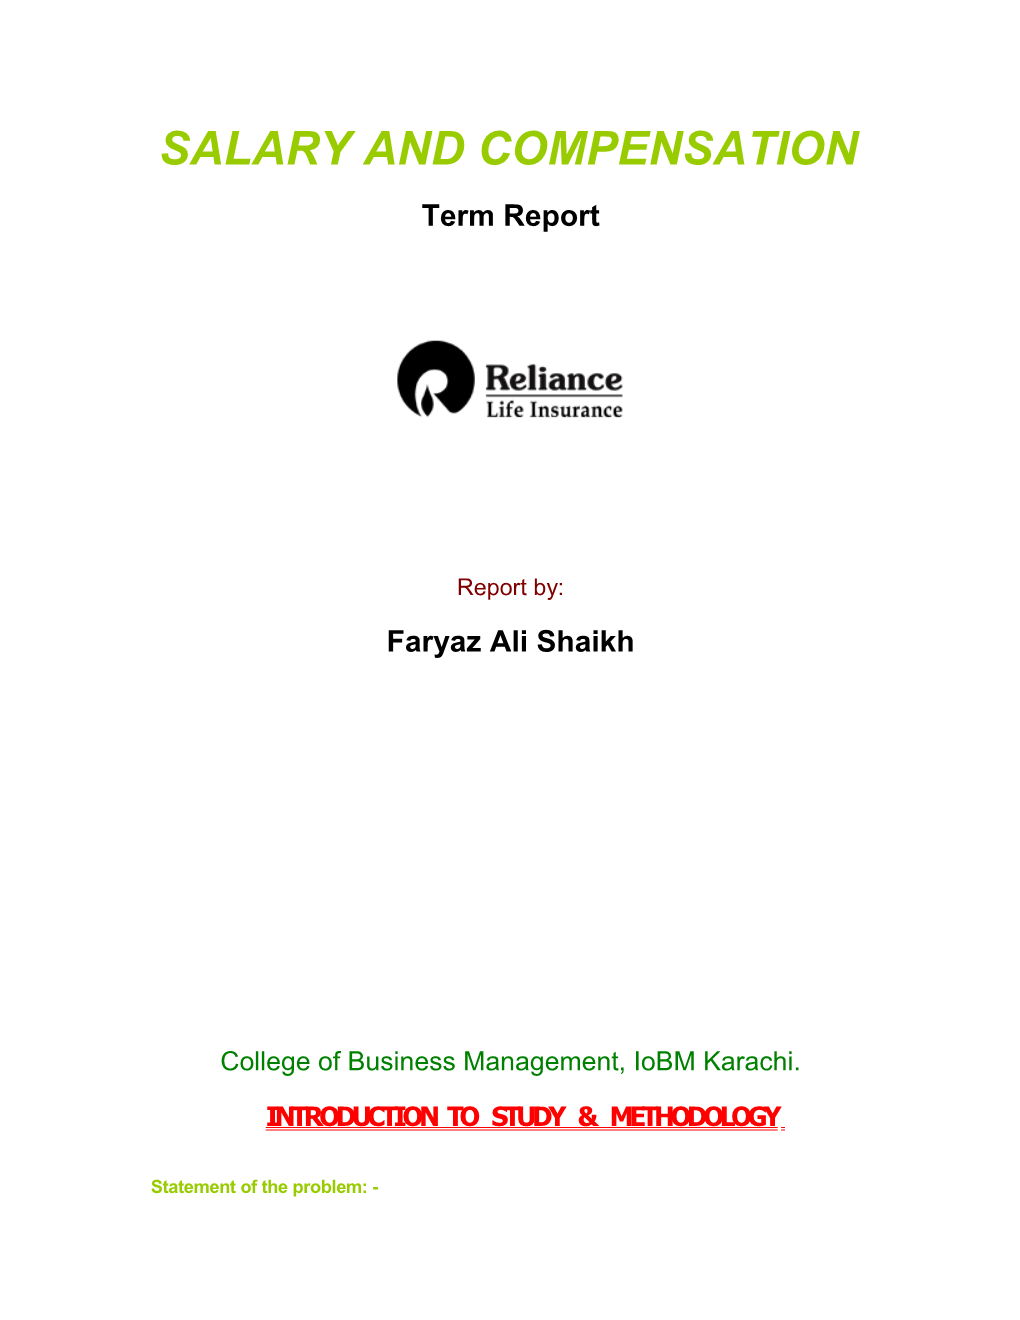 Salary and Compensation